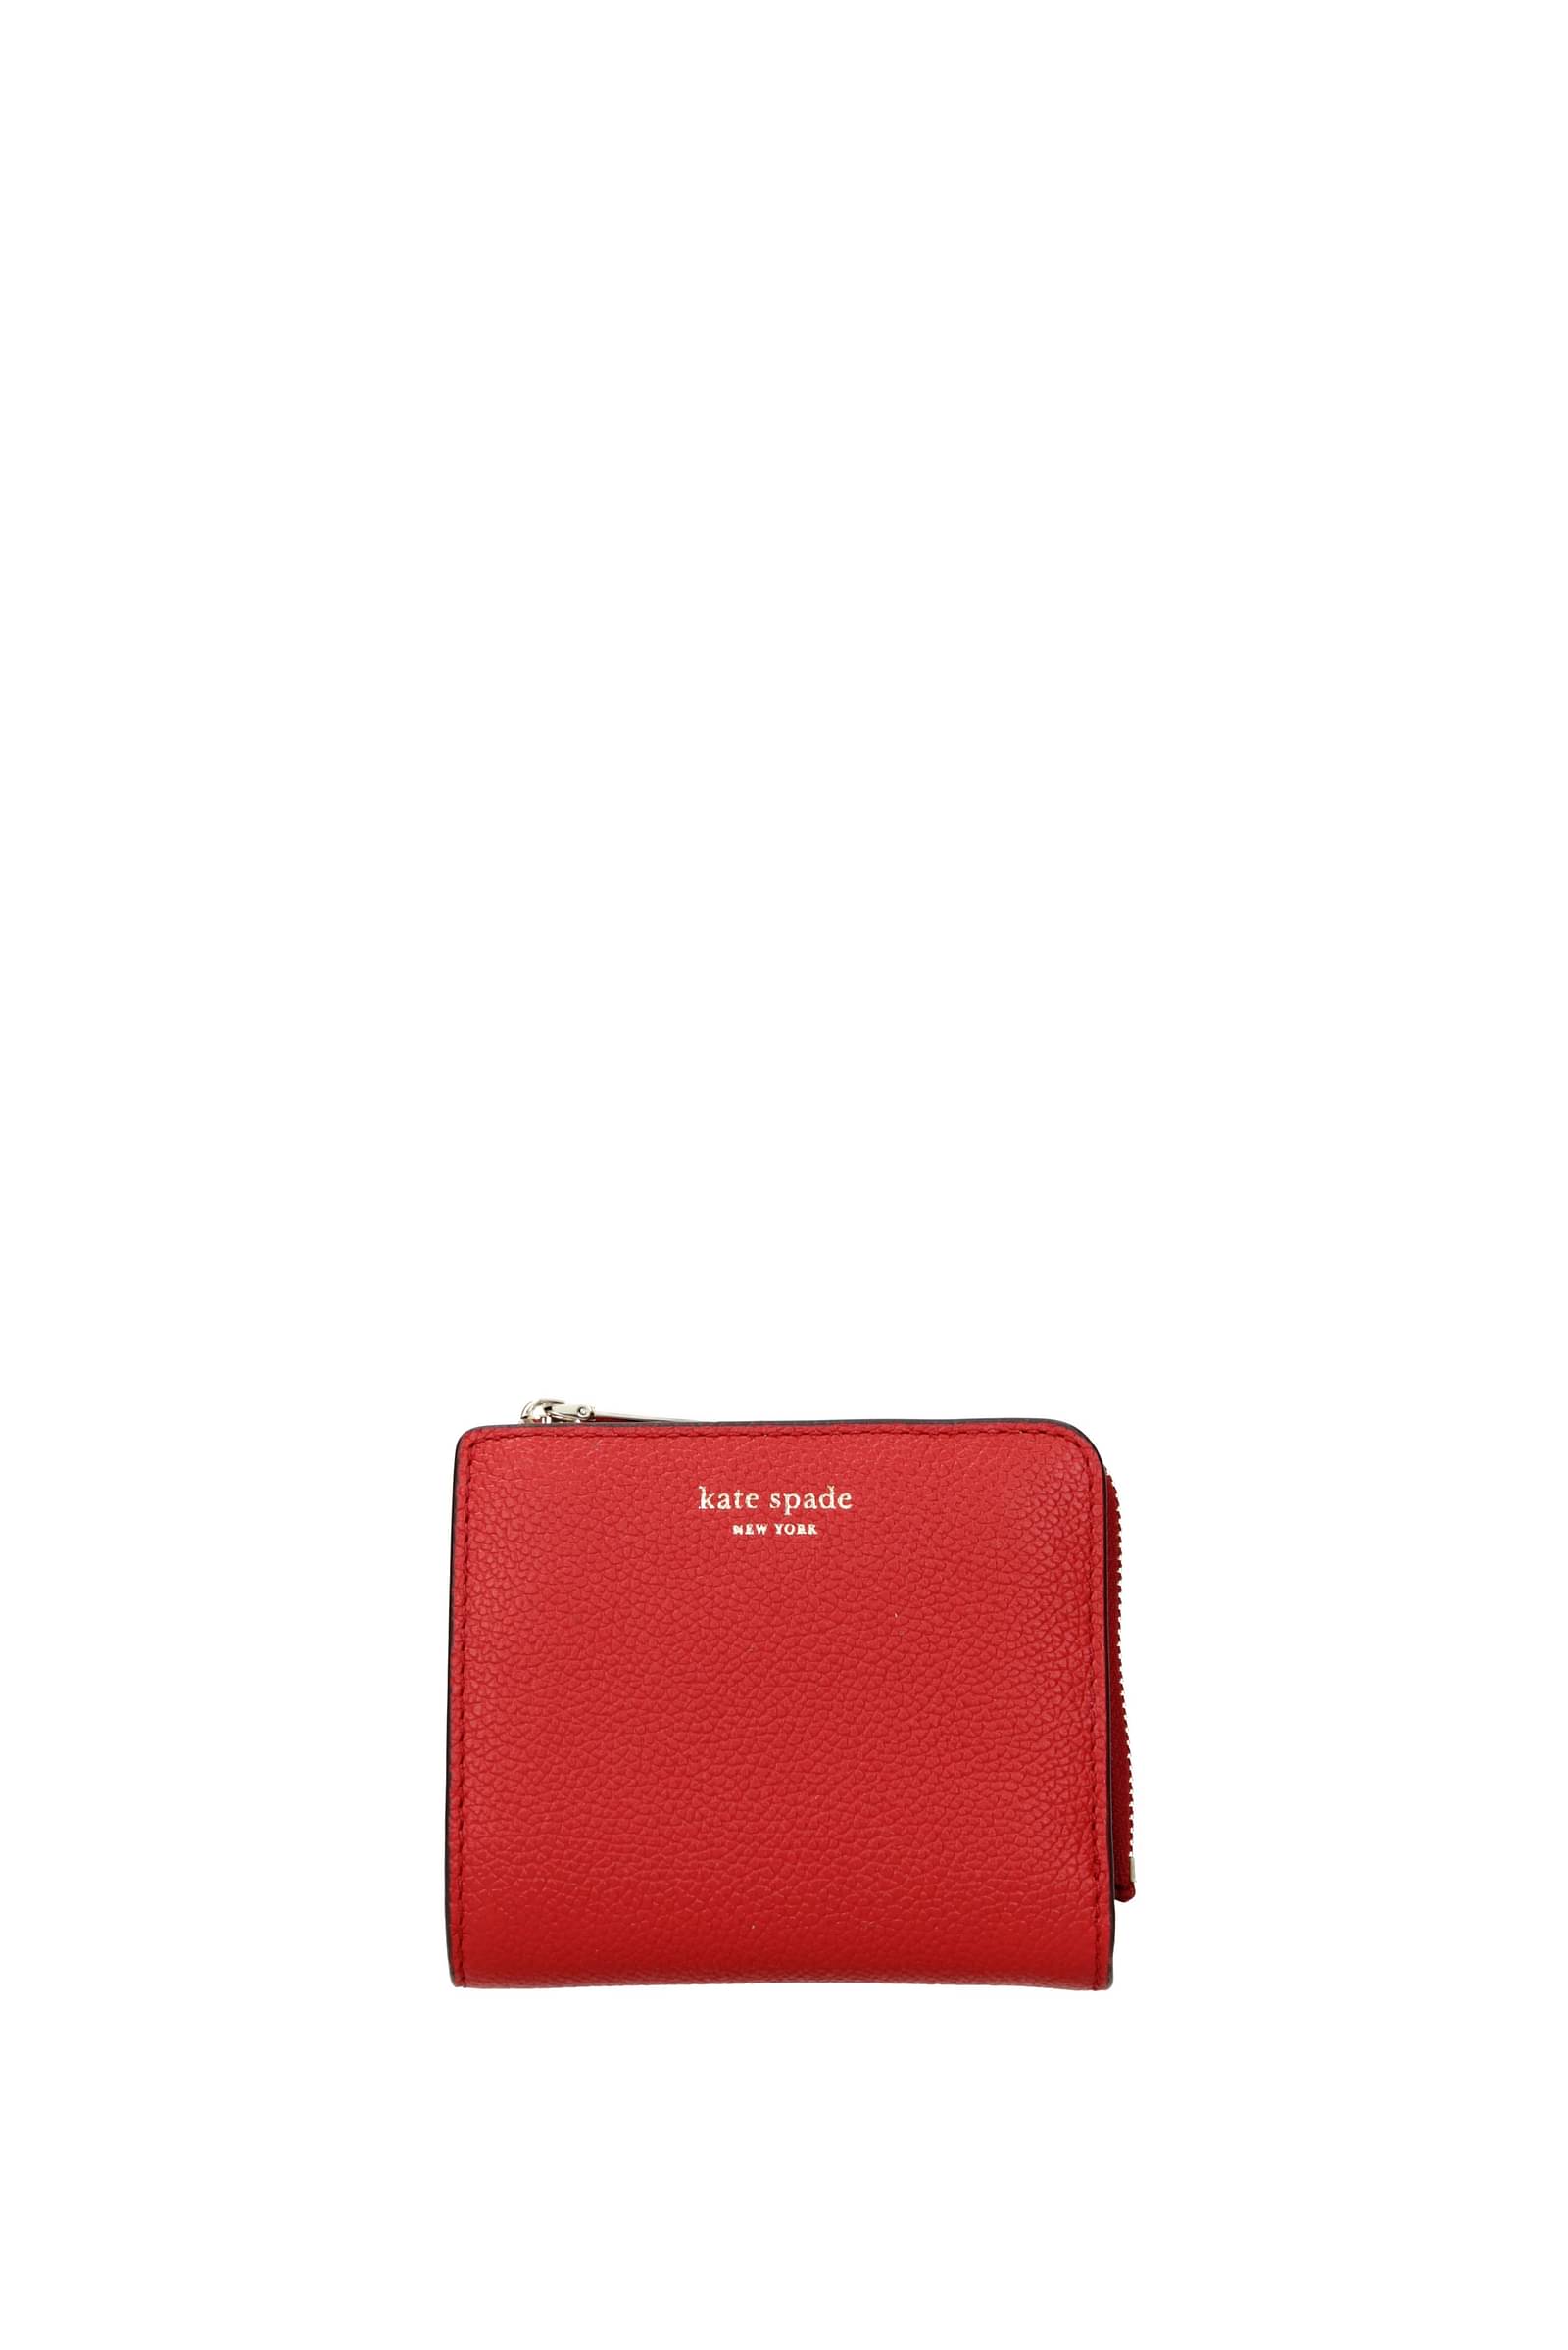 At Kate Spade Outlet store yesterday (didn't see it on the website). They  had the large and small size - I love this color and shape for summer! : r/ handbags